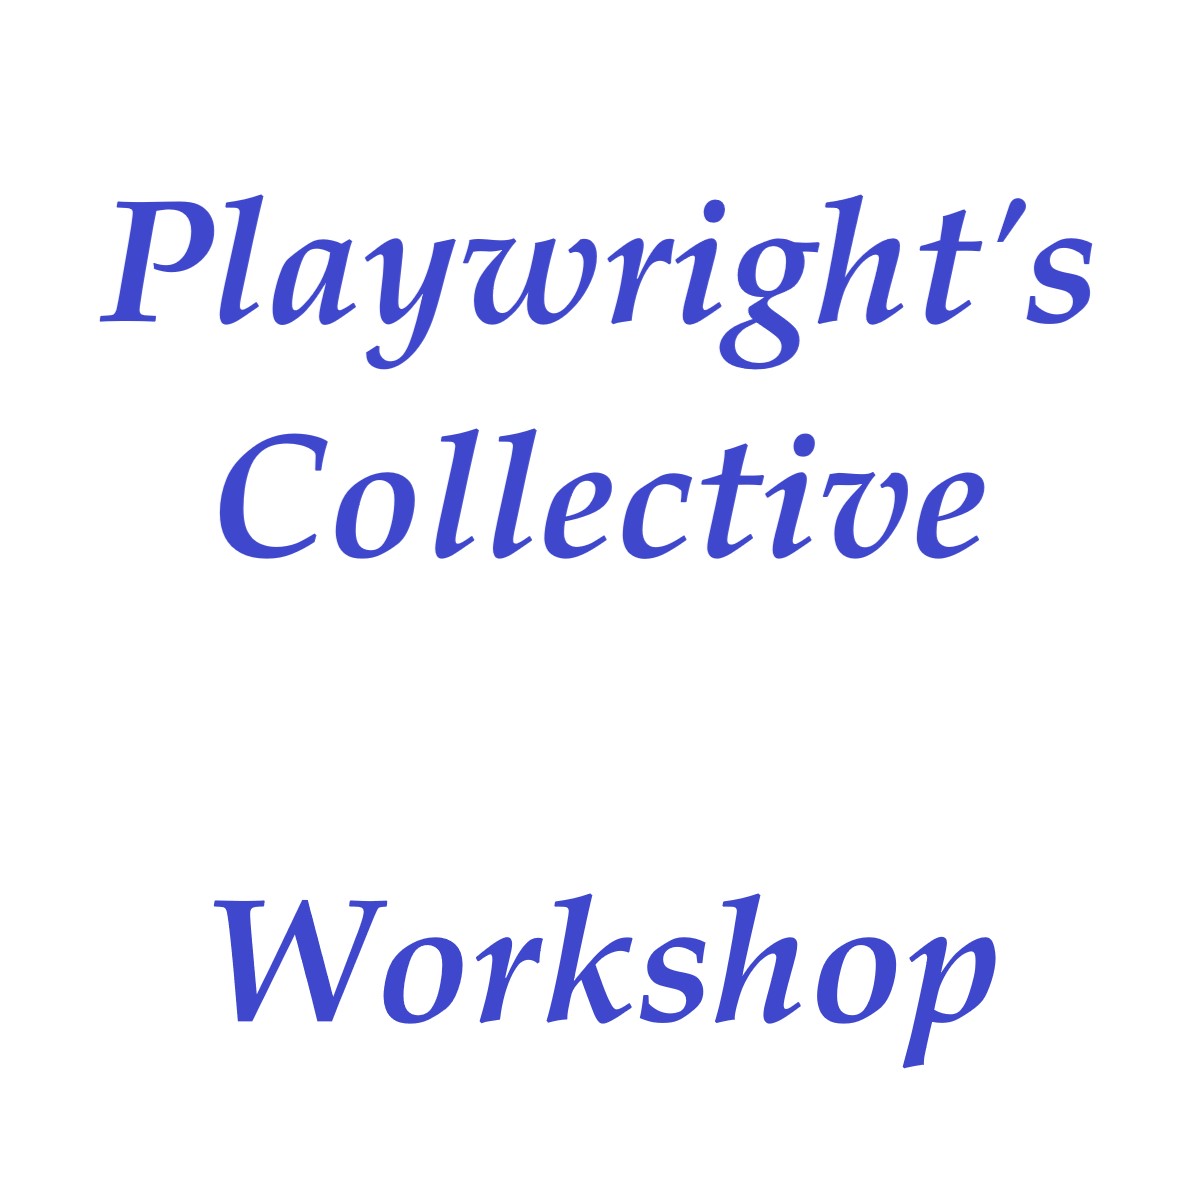 Playwrights Collective